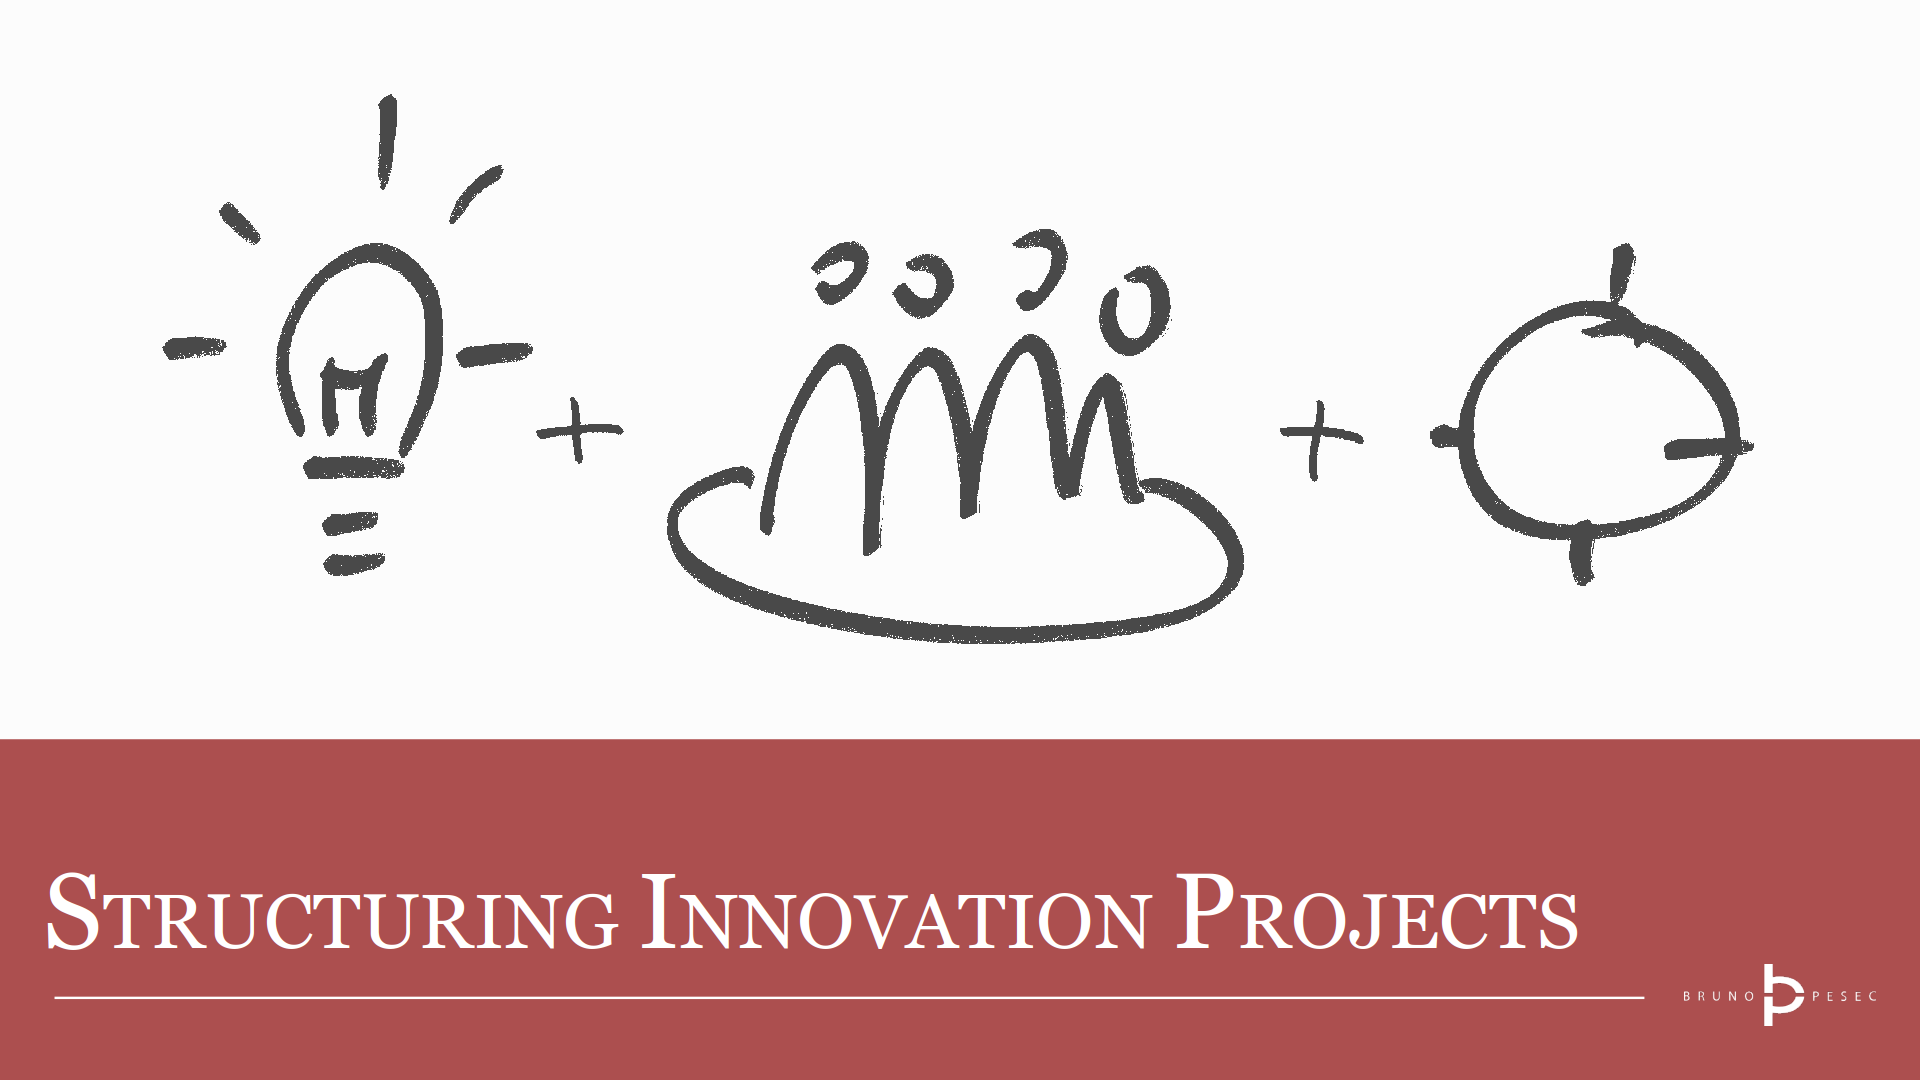 Structuring innovation projects